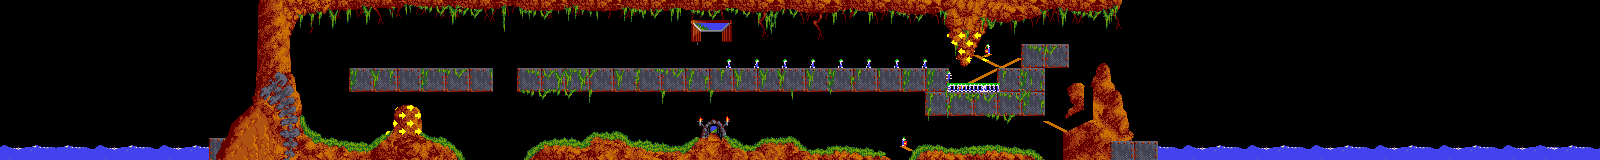 Overview: Lemmings, Amiga, Mayhem, 6 - One way or another